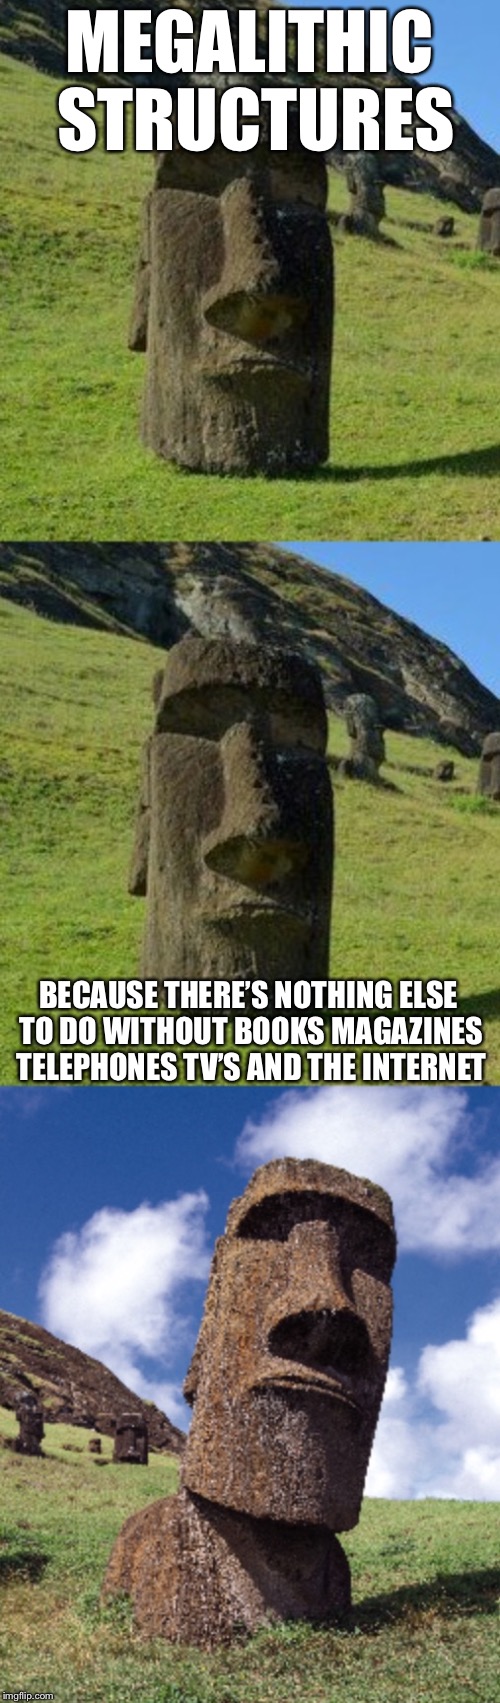 Bad Pun Moai | MEGALITHIC STRUCTURES; BECAUSE THERE’S NOTHING ELSE TO DO WITHOUT BOOKS MAGAZINES TELEPHONES TV’S AND THE INTERNET | image tagged in bad pun moai,memes,ancient,so true | made w/ Imgflip meme maker